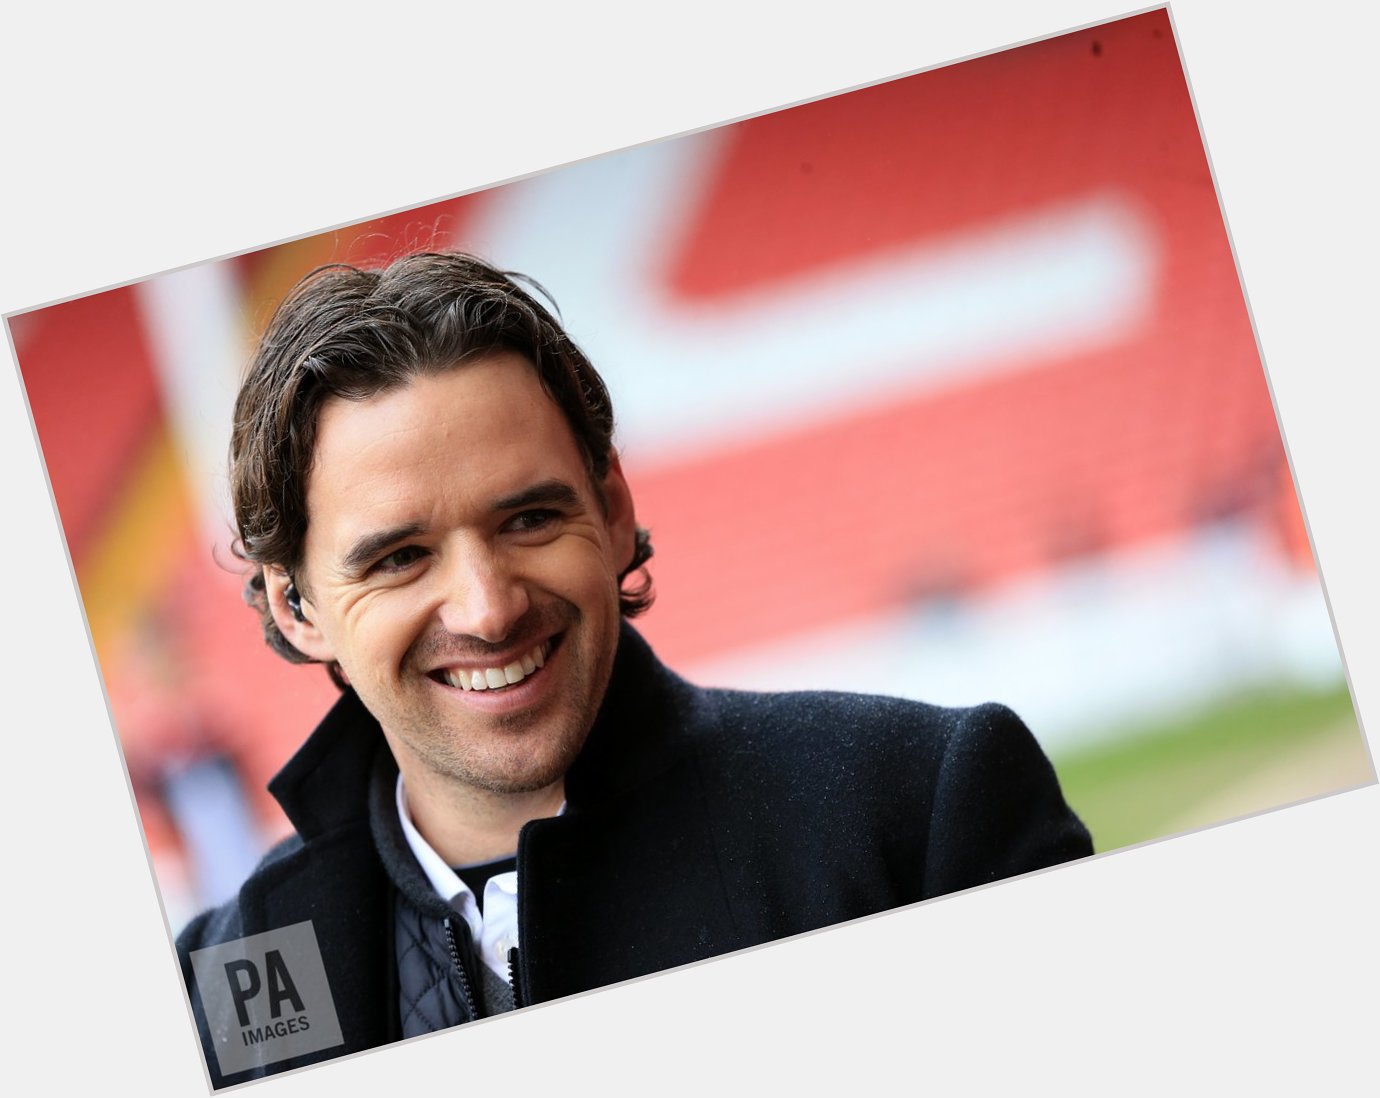 Happy birthday to former Bayern Munich, Manchester United and England midfielder Owen Hargreaves who is 38 today.  